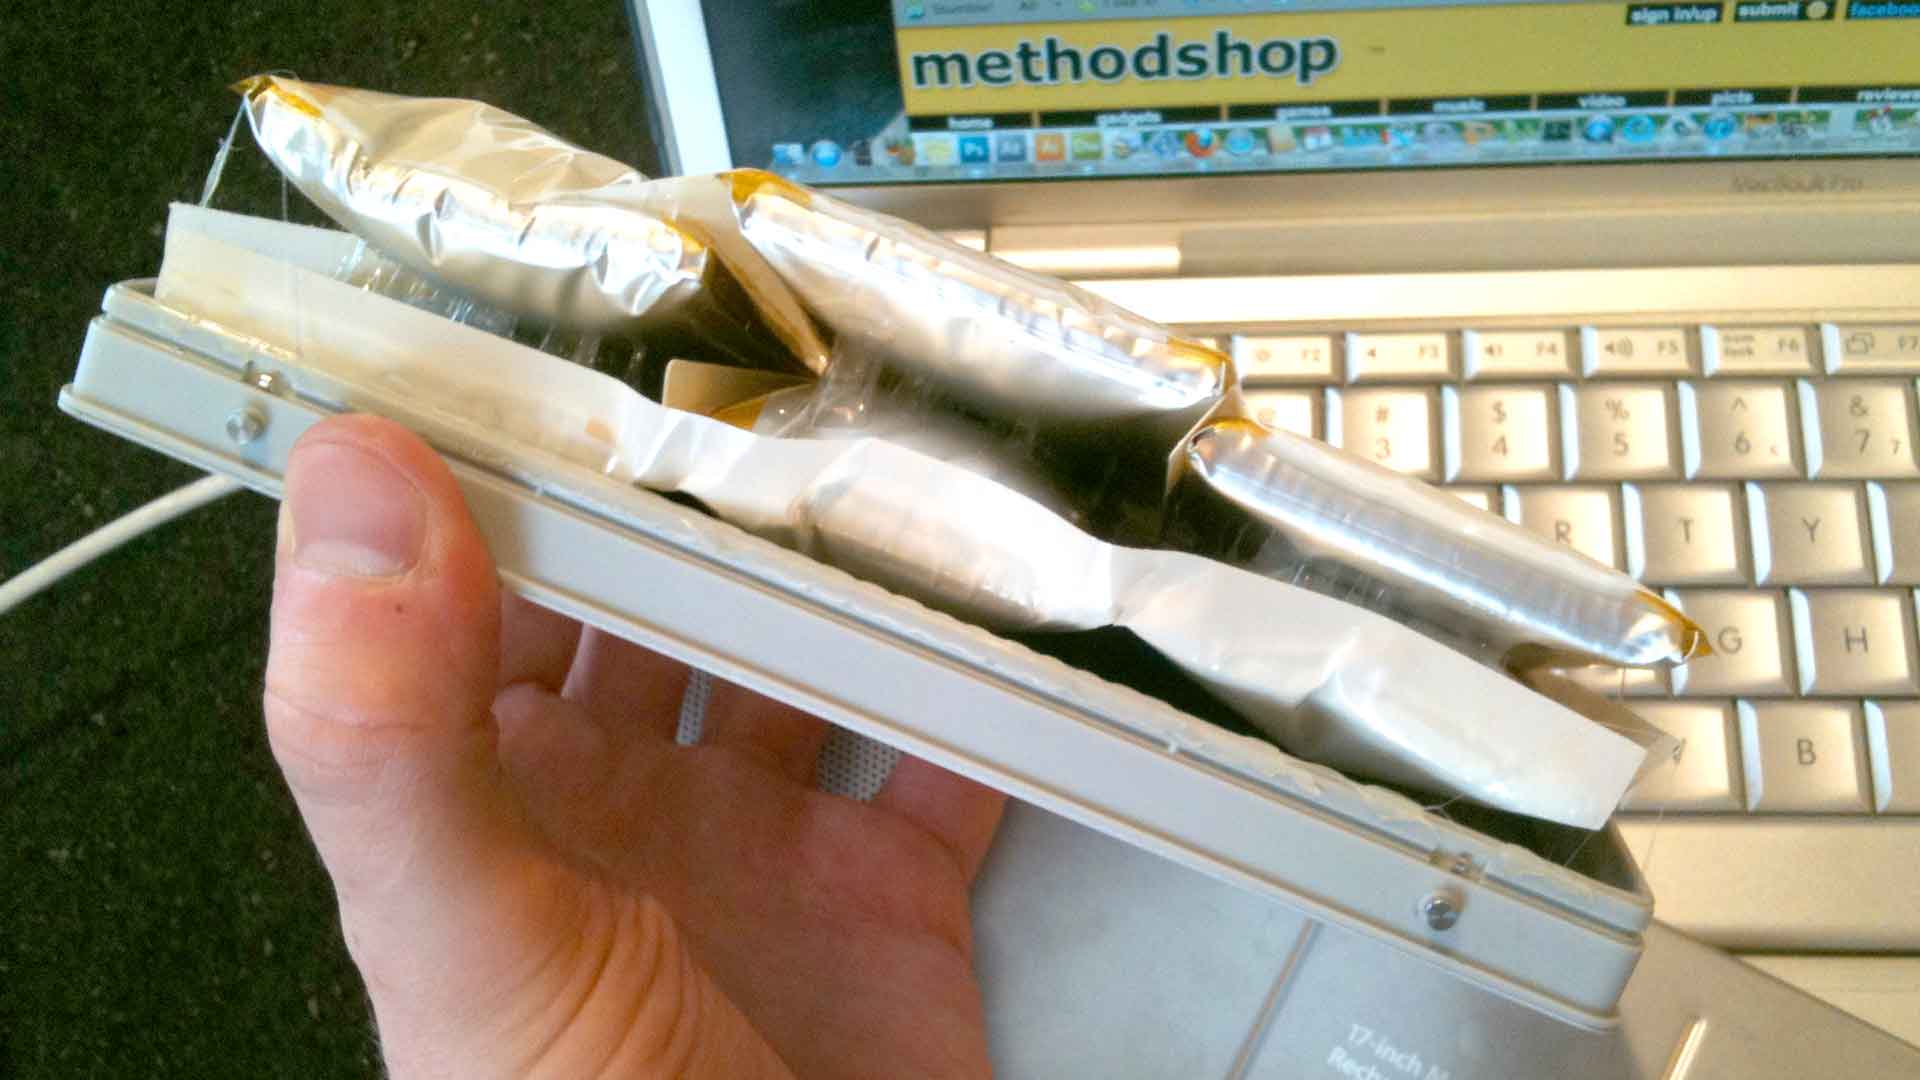 This MacBook Battery is Totally F*cked! Battery Removed Just Before It Explodes